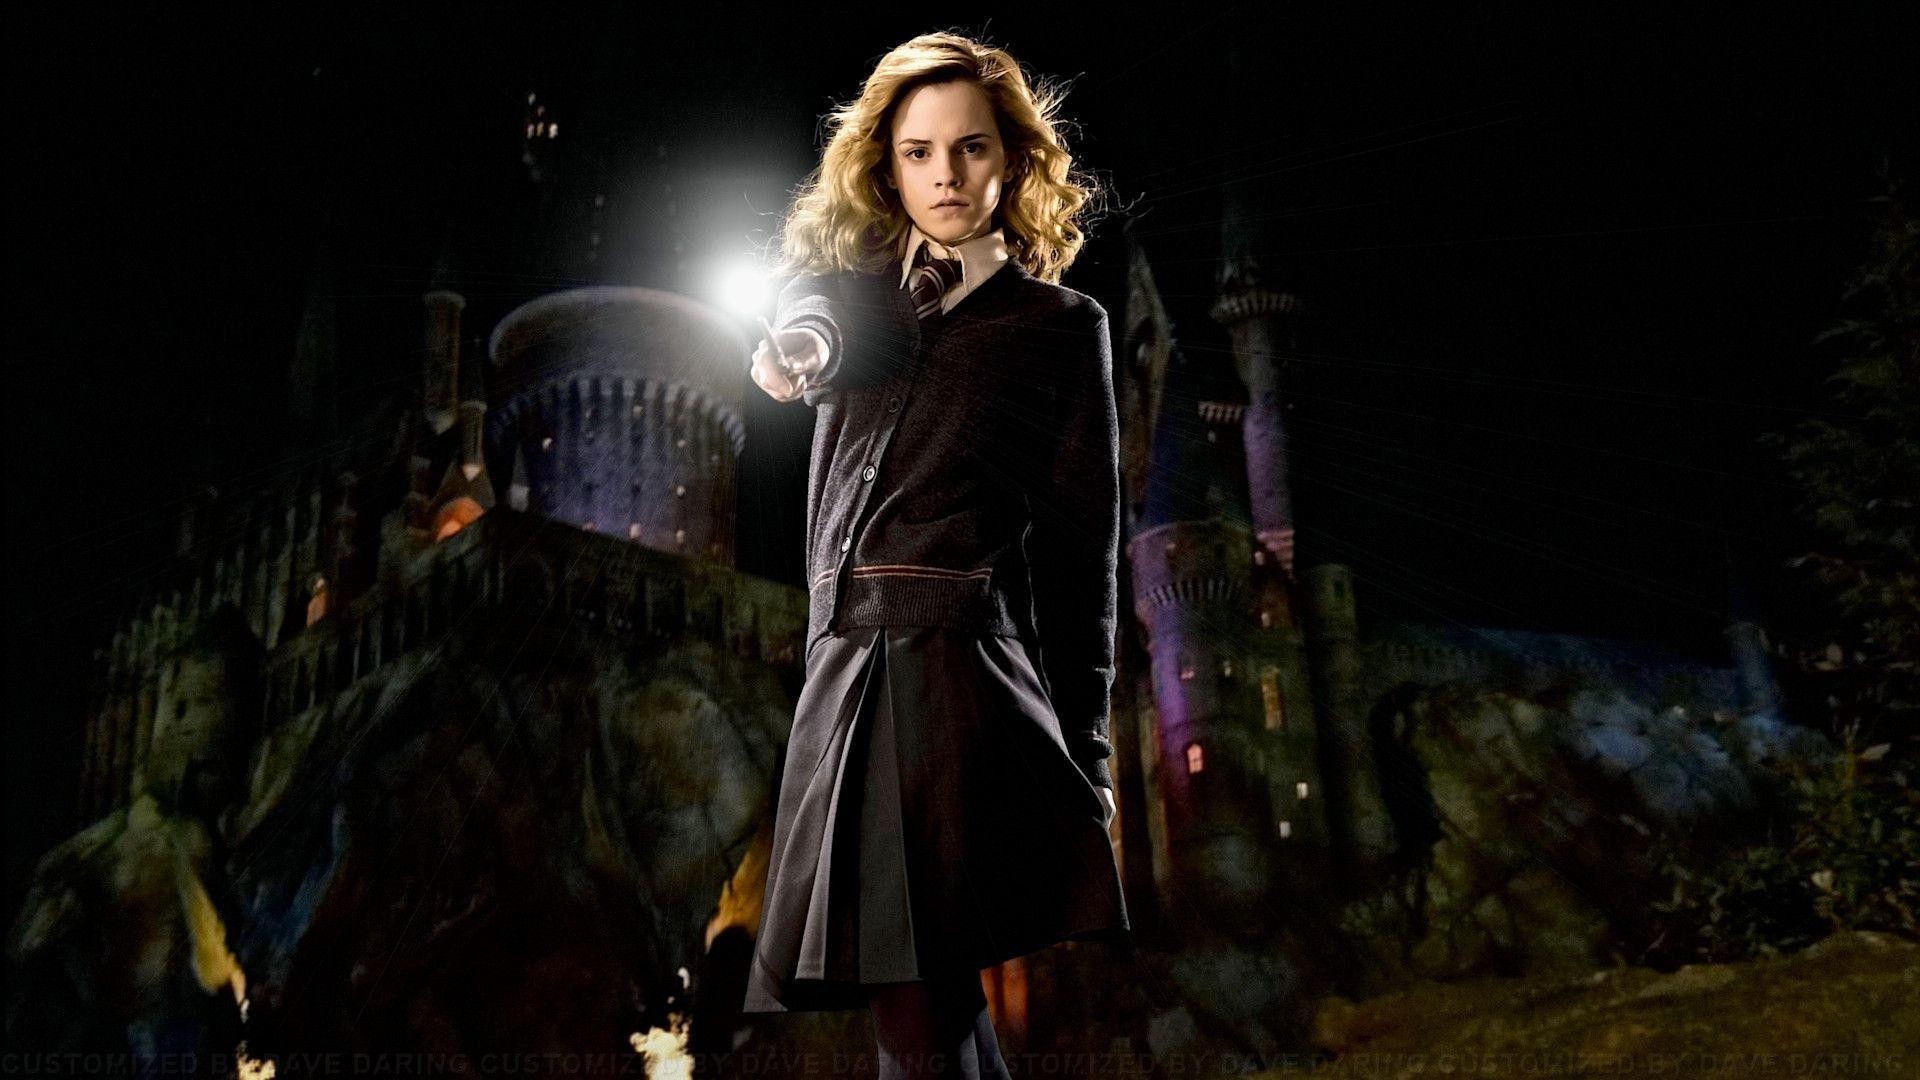 hermione granger hd wallpapers,darkness,fashion,outerwear,photography,night